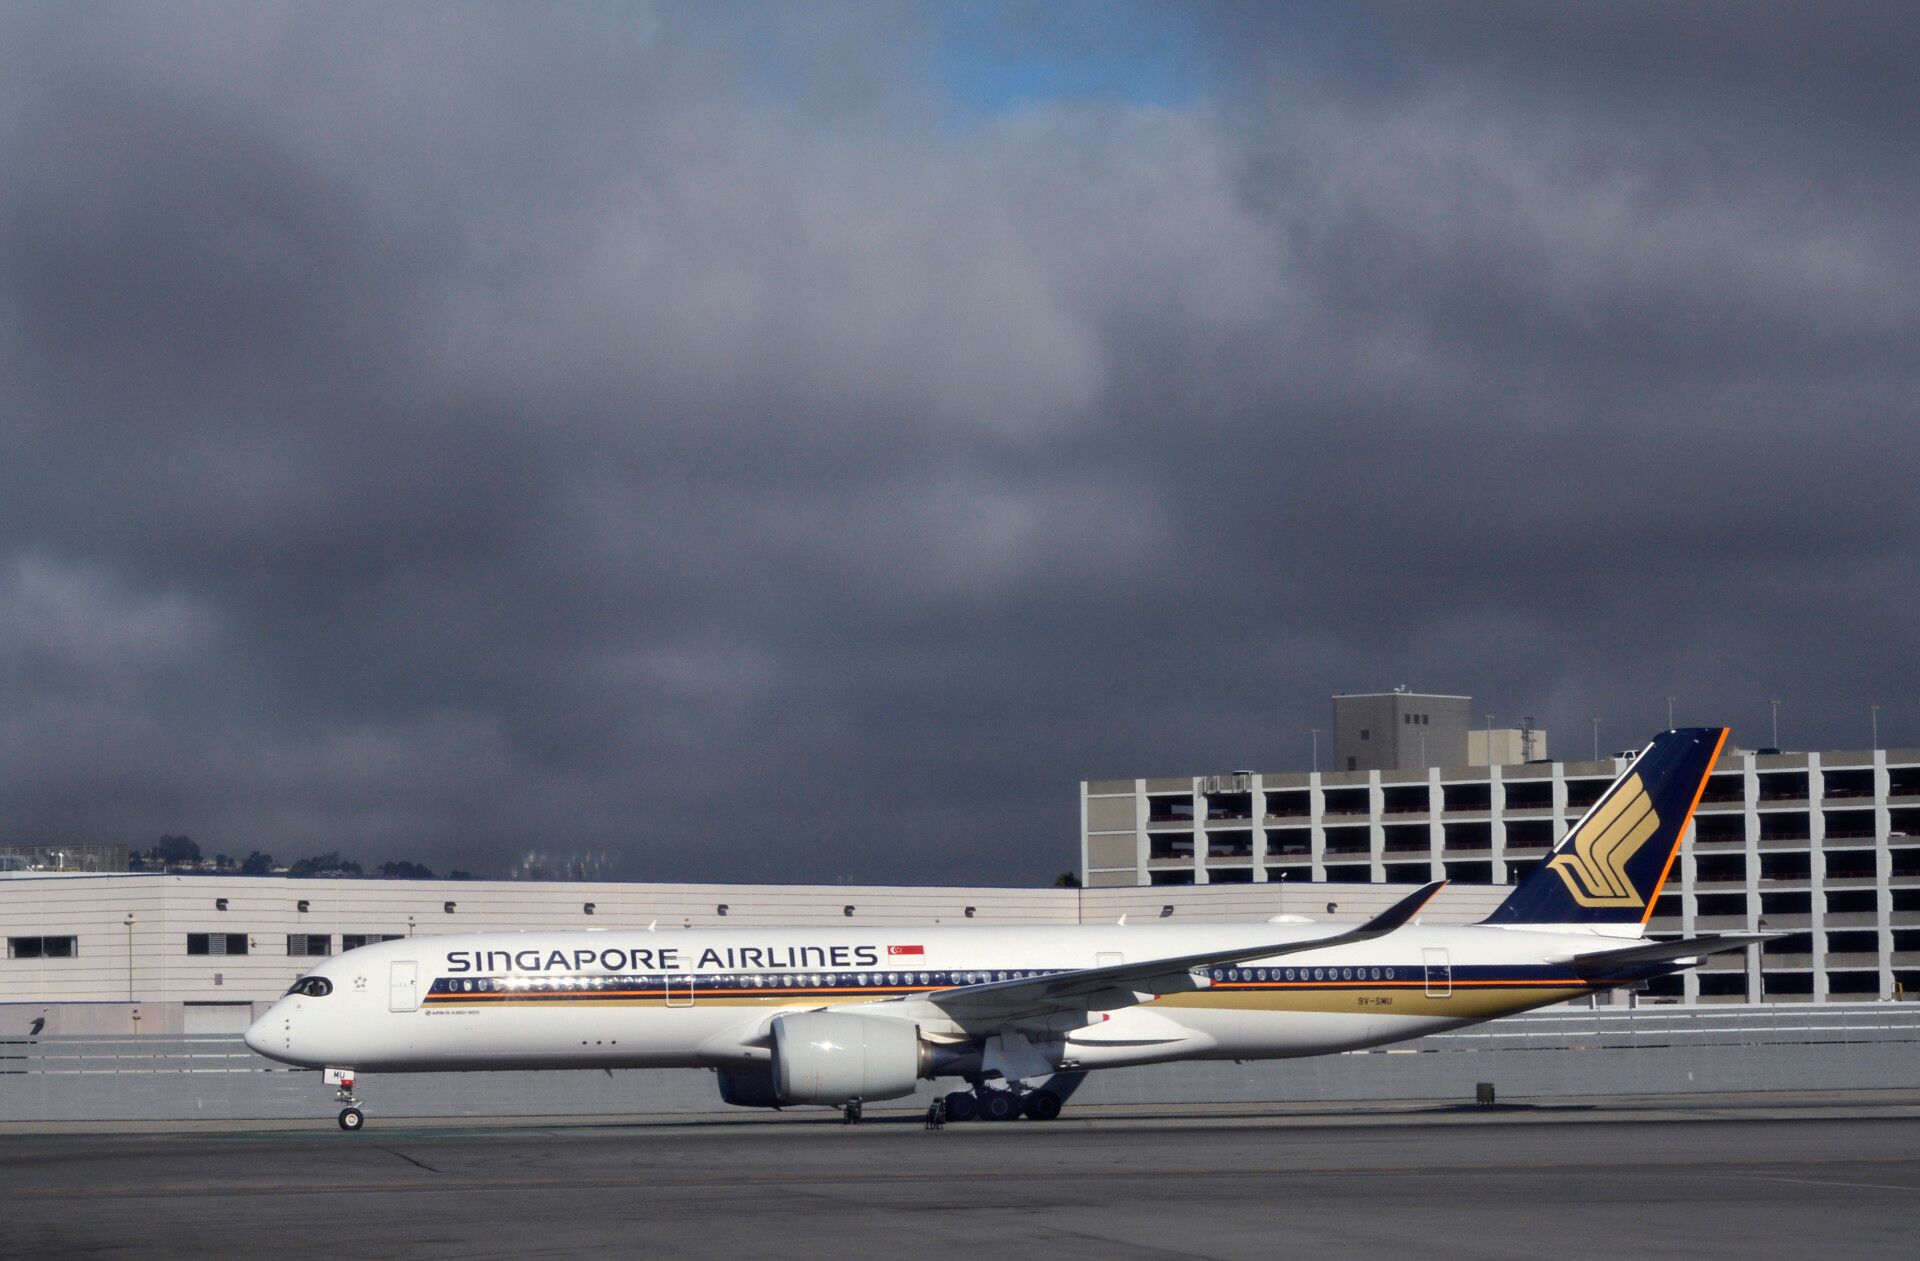 Singapore Airlines A350-900 SFO Getty